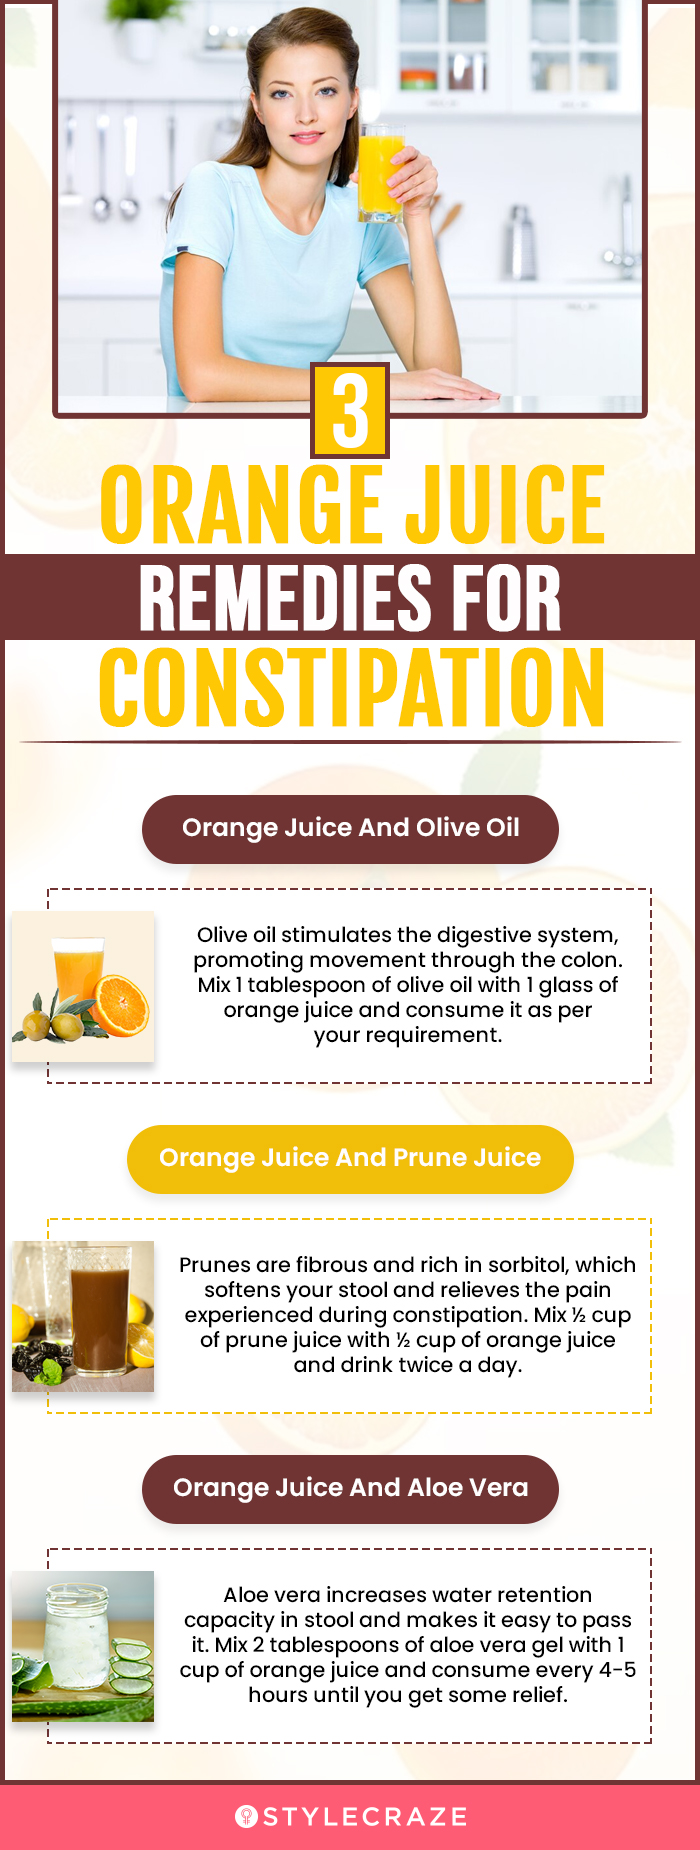 3 orange juice remedies for constipation (infographic)